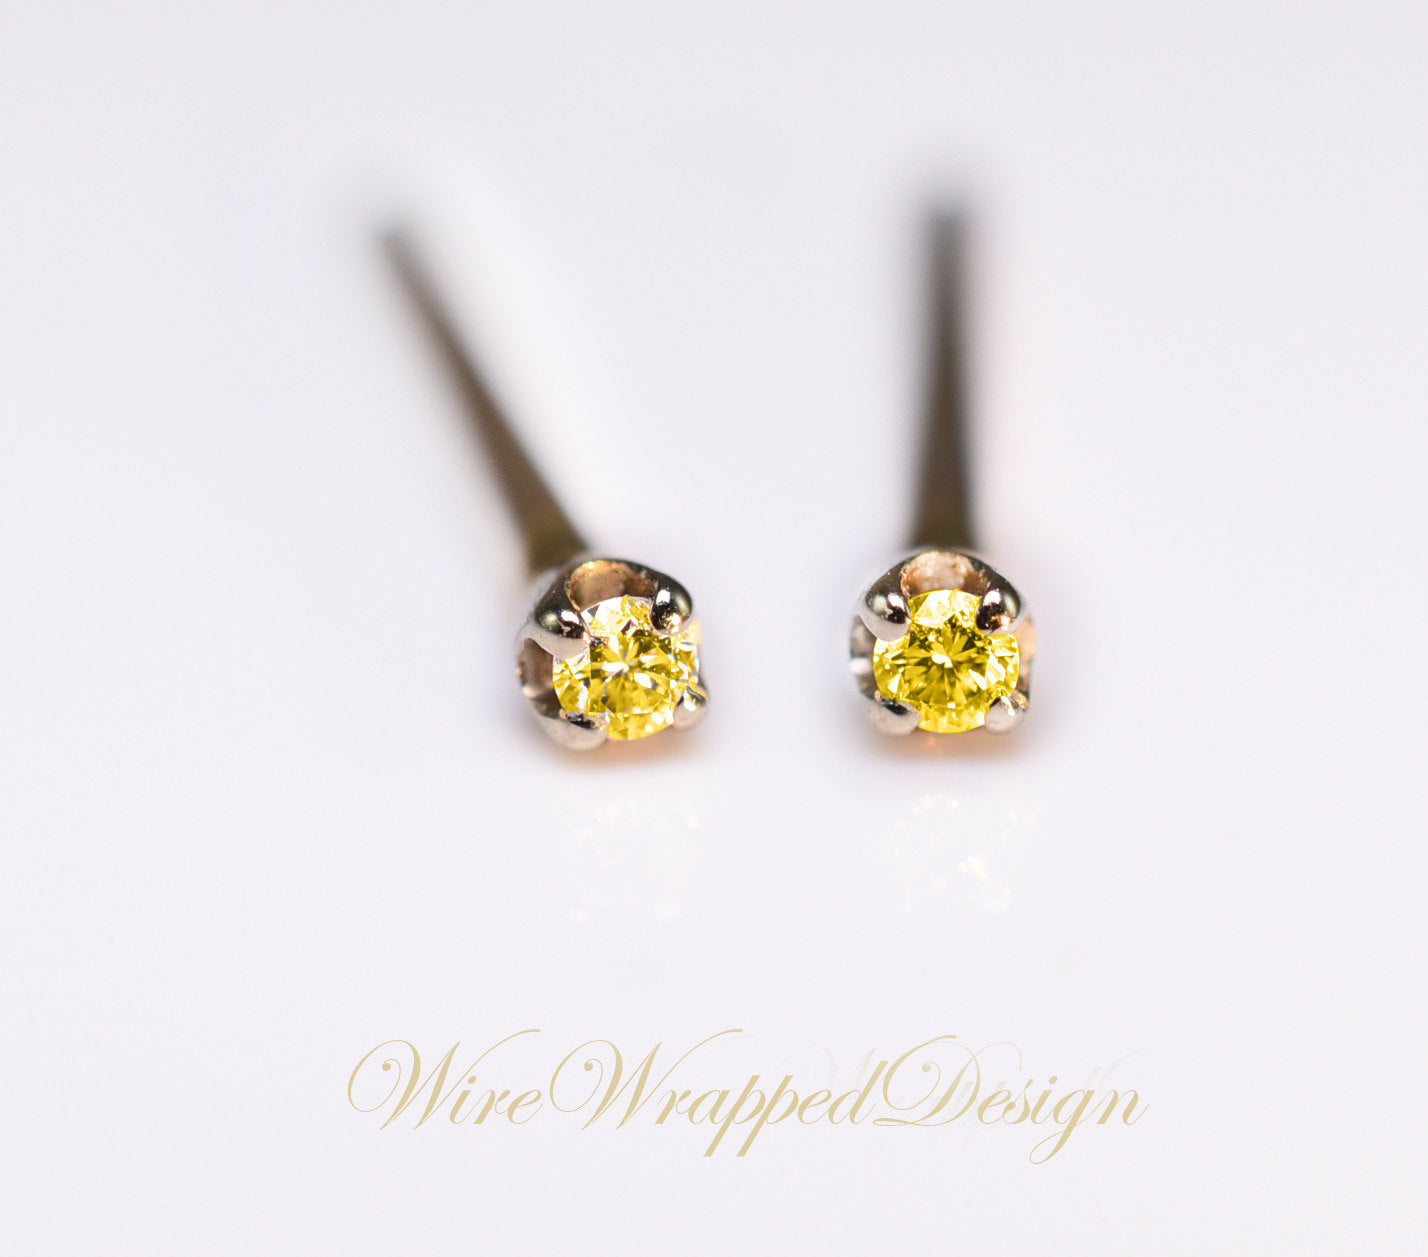 Genuine Canary Yellow DIAMOND Earring Studs 1.3mm 0.02tcw Post 14k Solid Gold (Yellow, Rose or White), Platinum, Silver Lobe Cartilage Helix